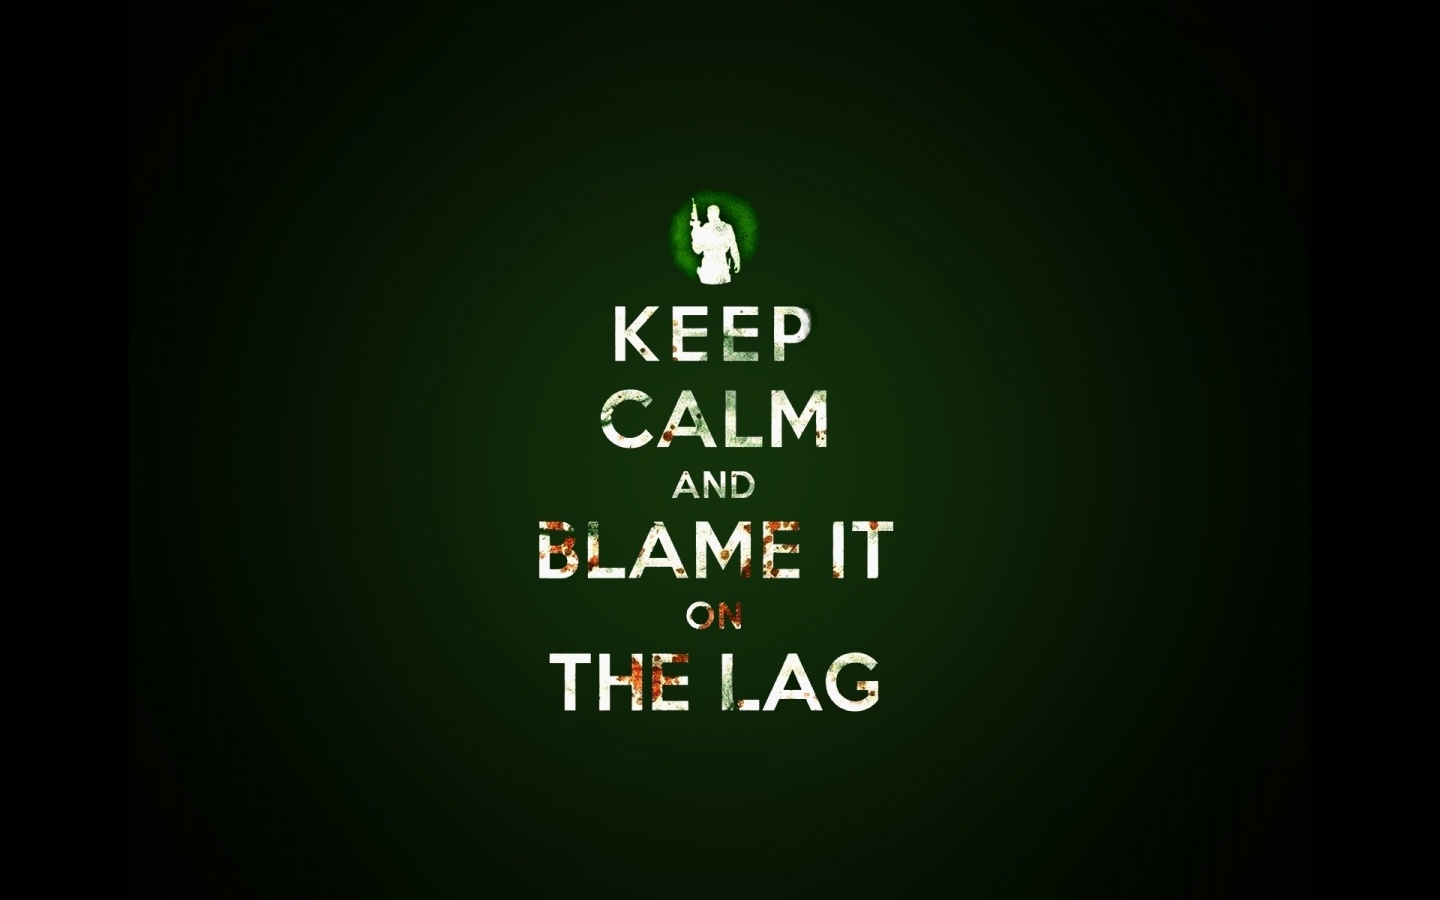  Keep Calm and Blame it on the Lag desktop PC and Mac wallpaper